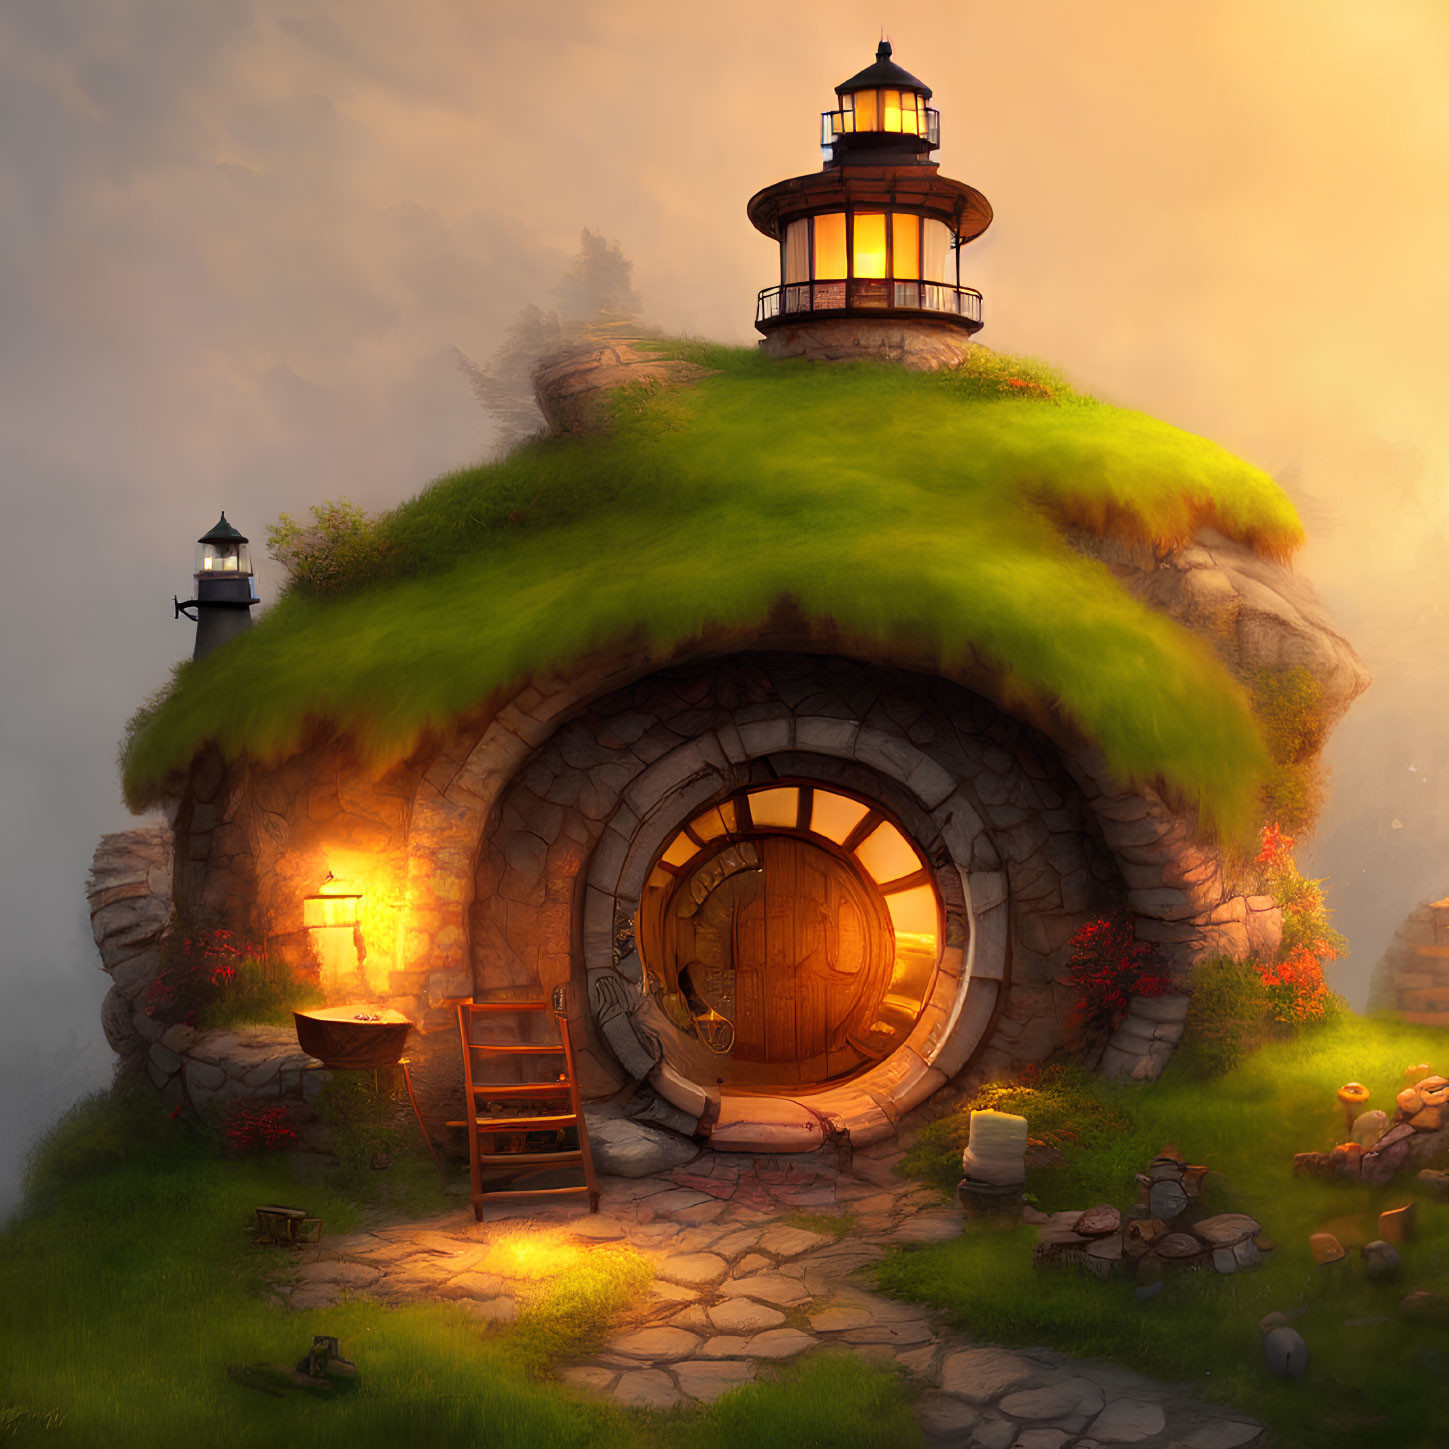 Cottage with grassy roof, lighthouse, misty glow, wooden door, stone walls